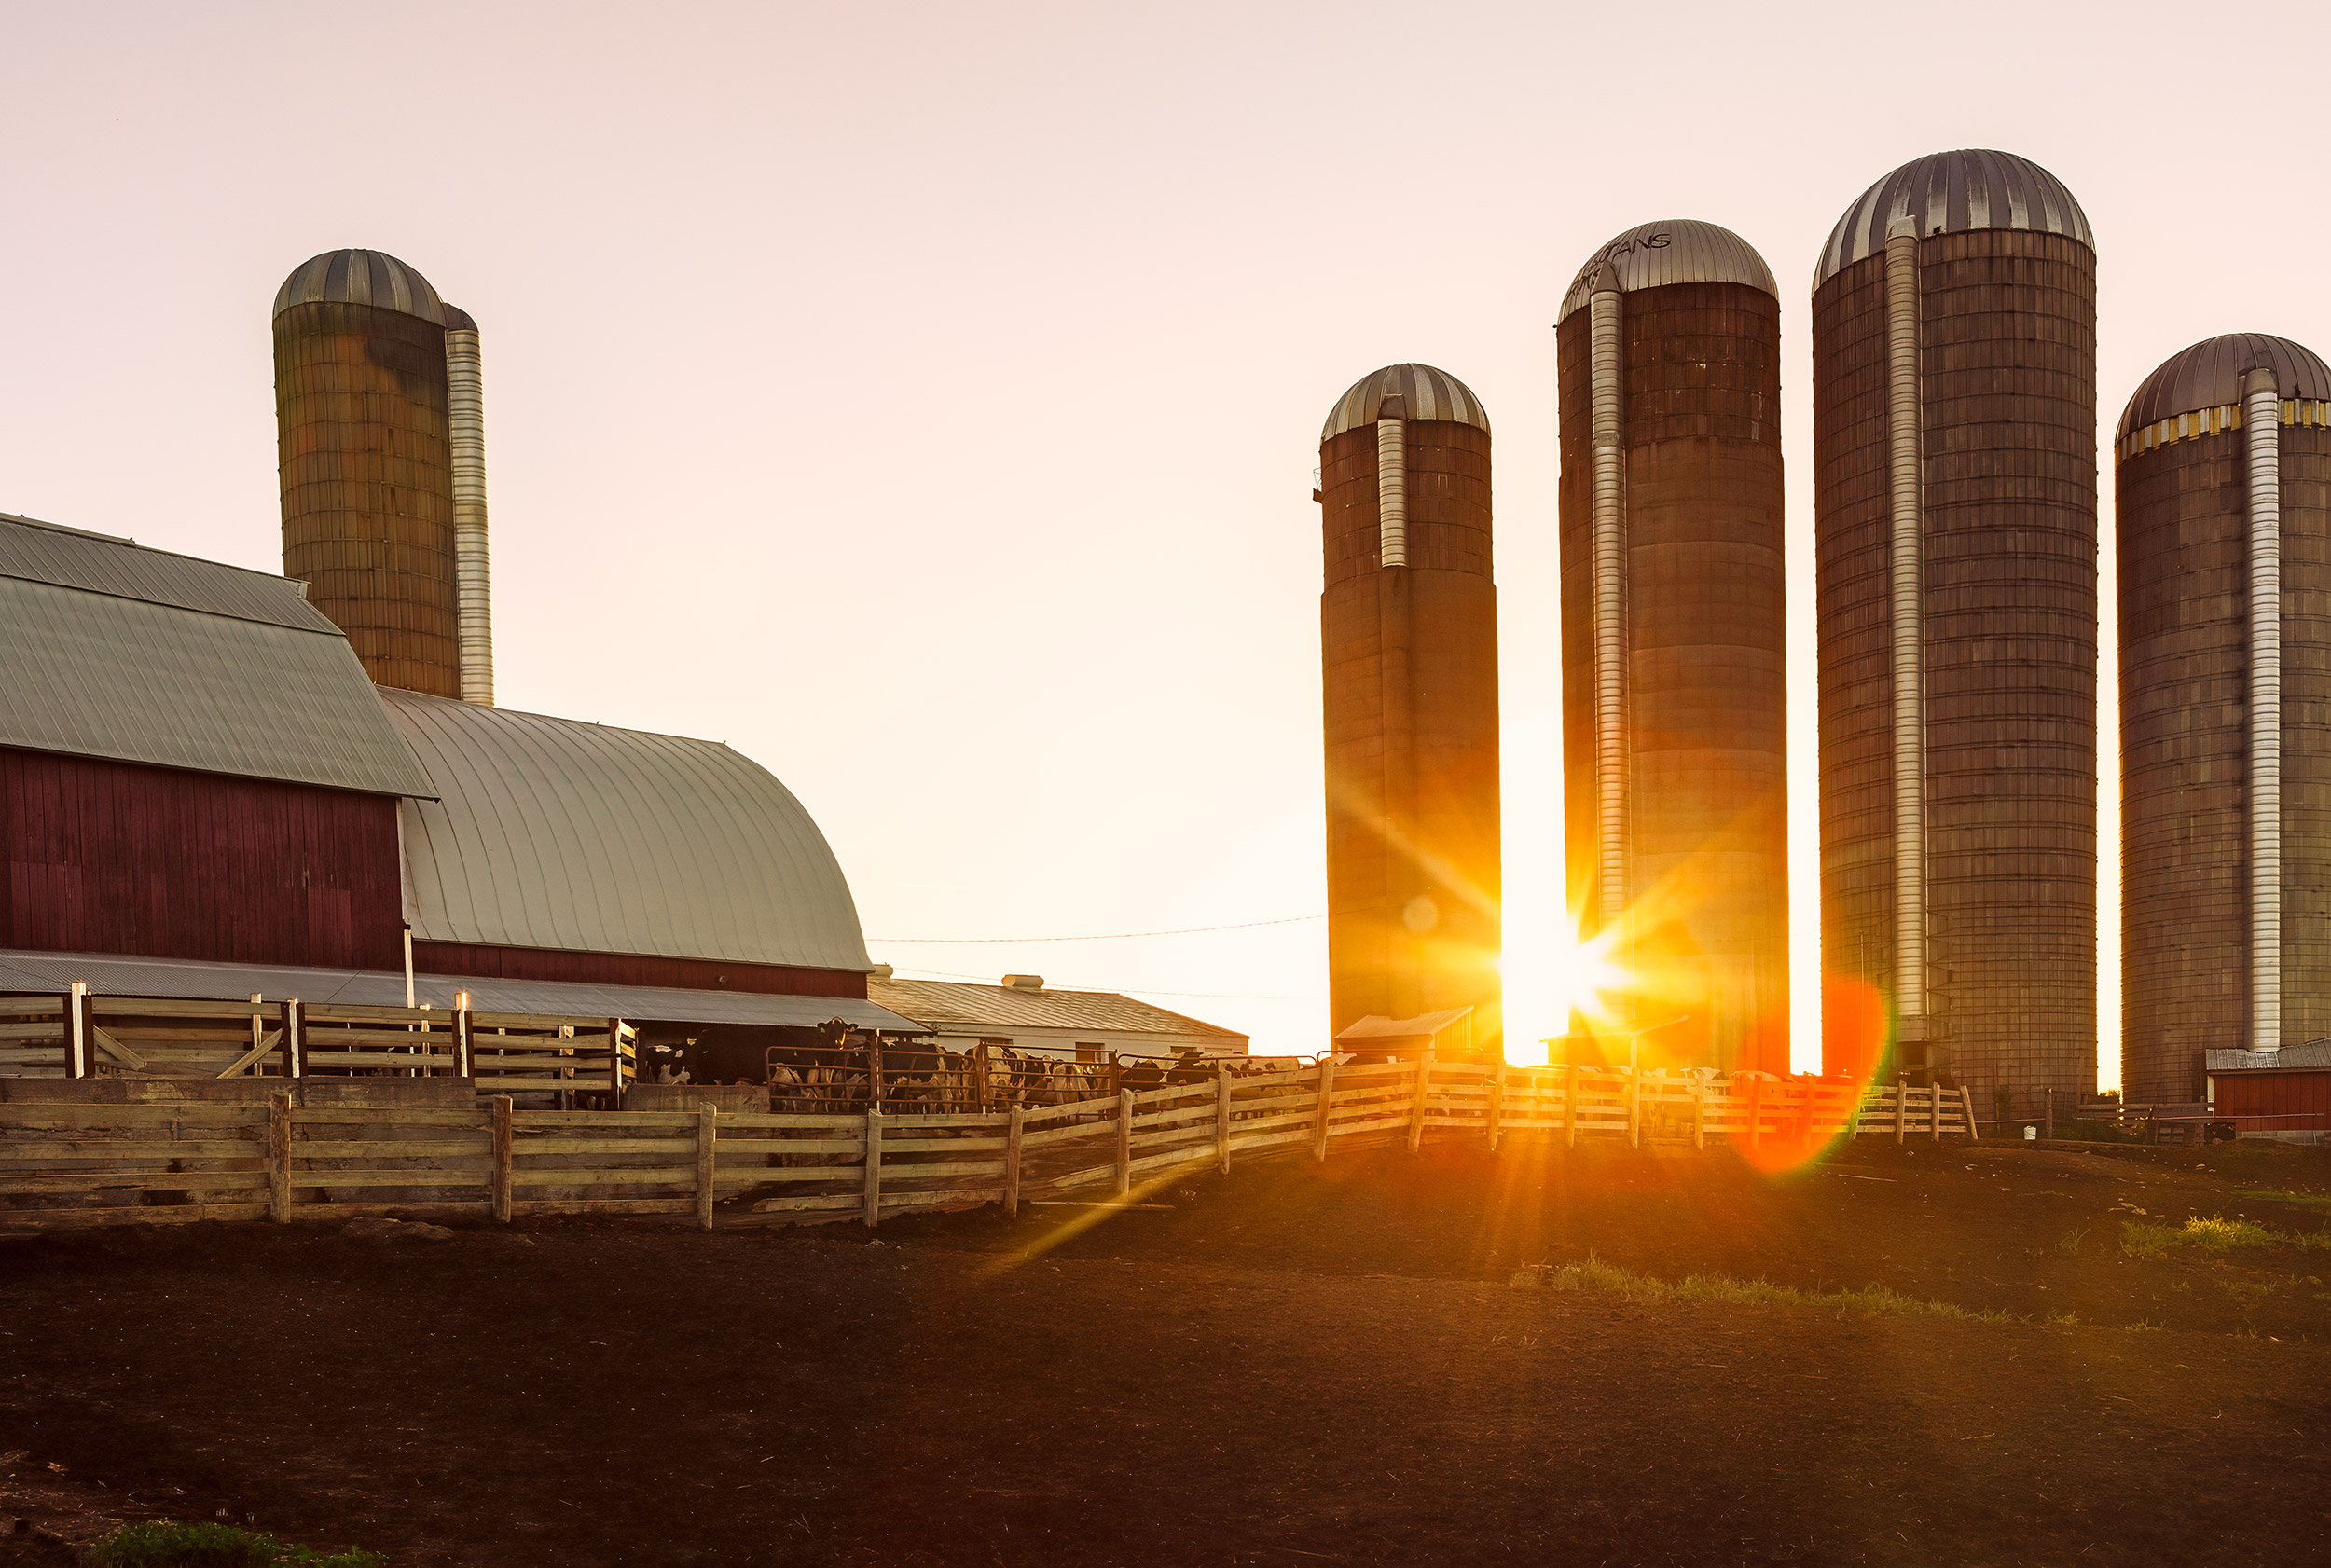 Agriculture Photography live stock dairy cows barn and silos at sunrise